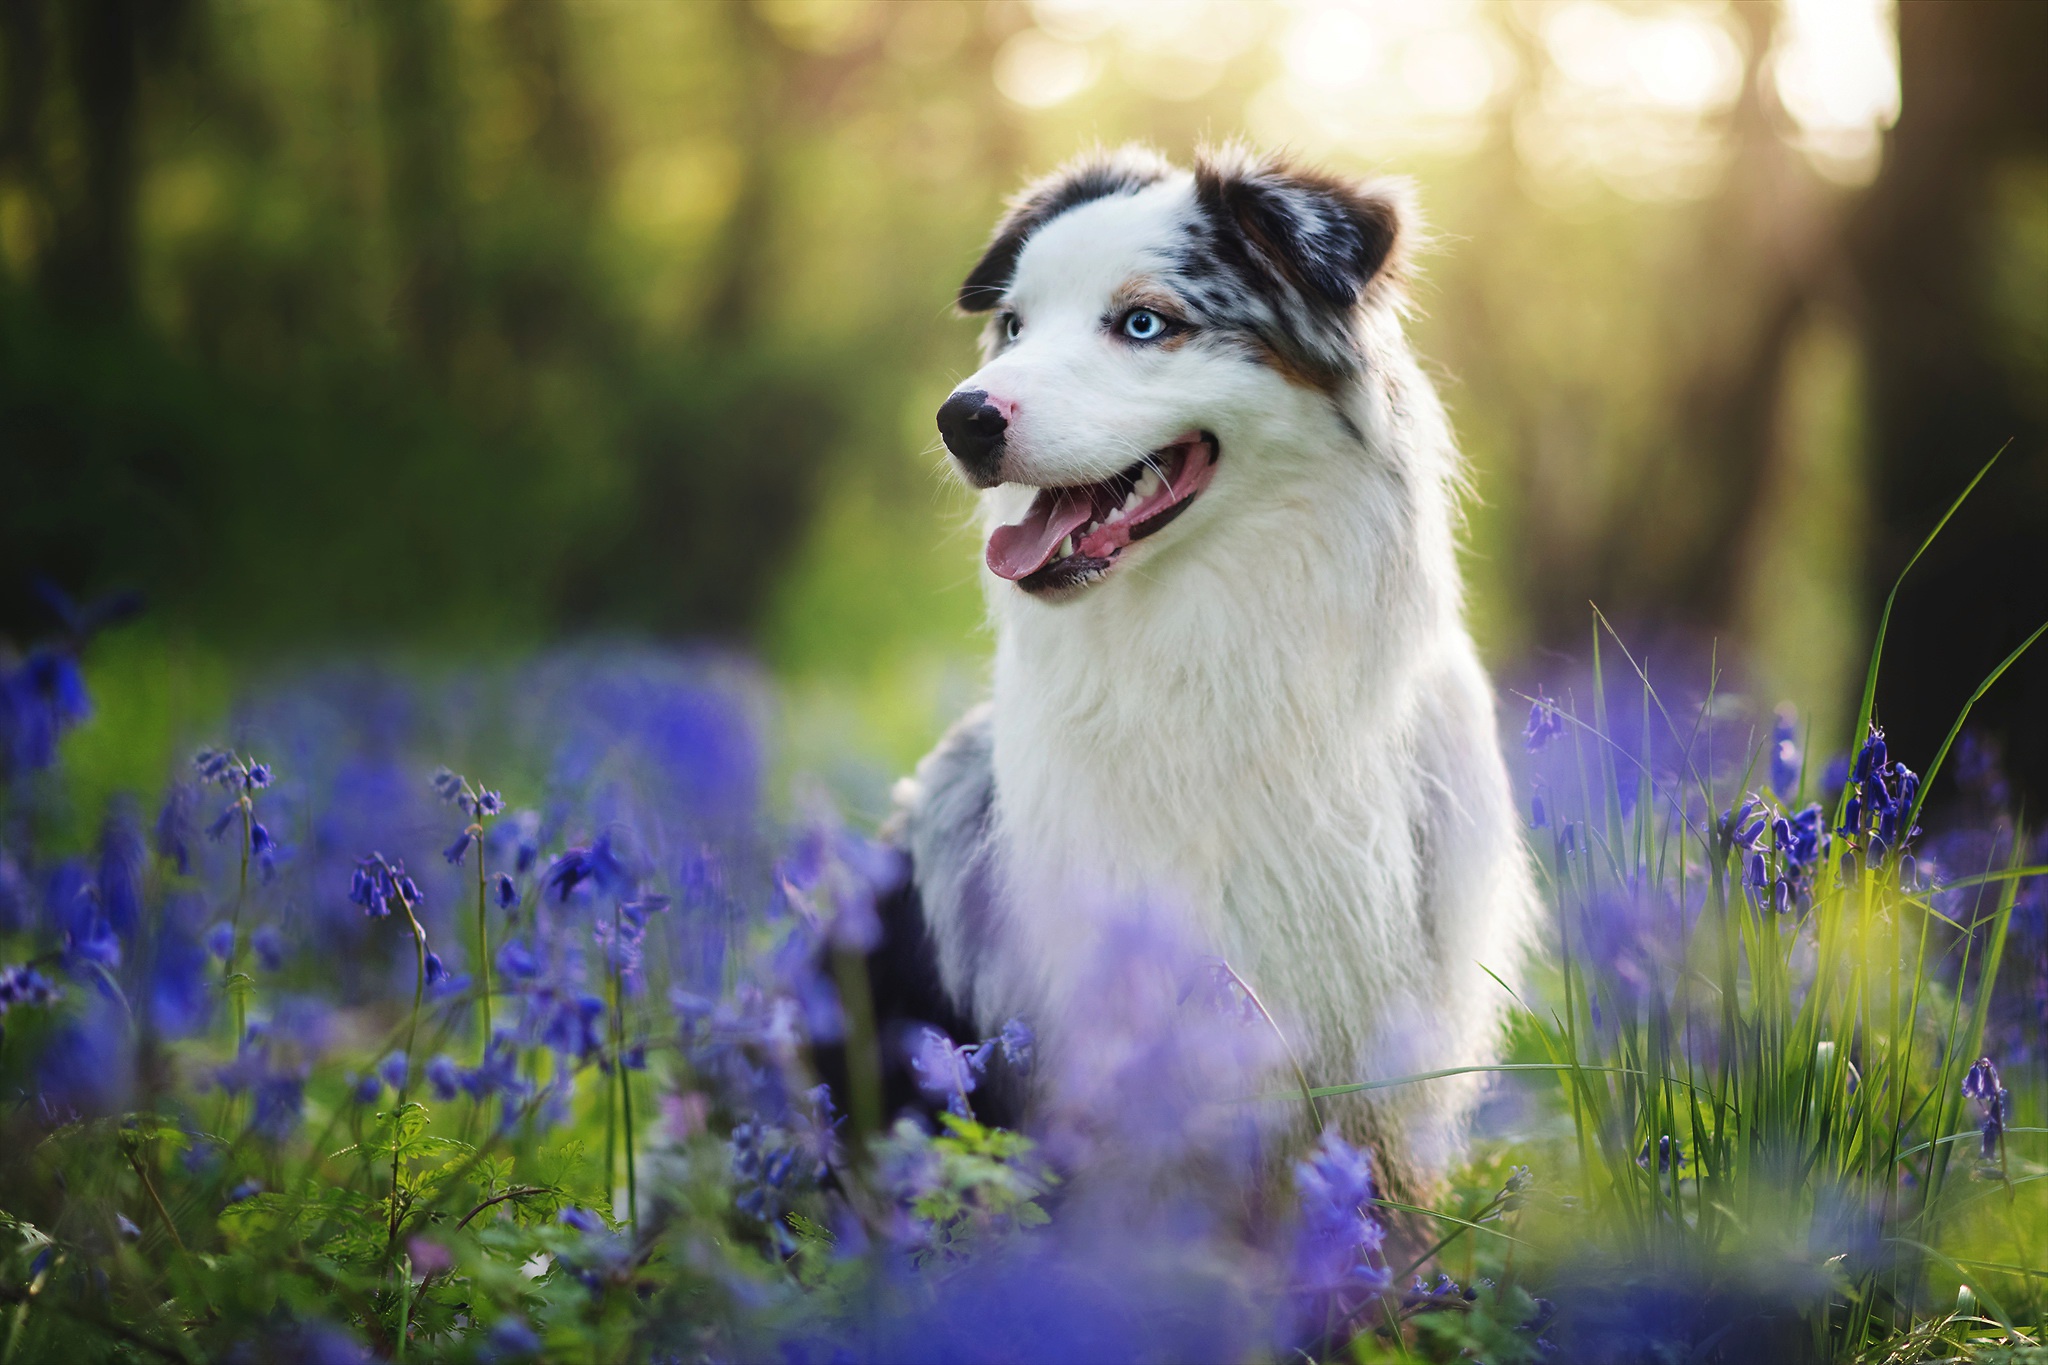 General 2048x1365 flowers plants nature animals dog